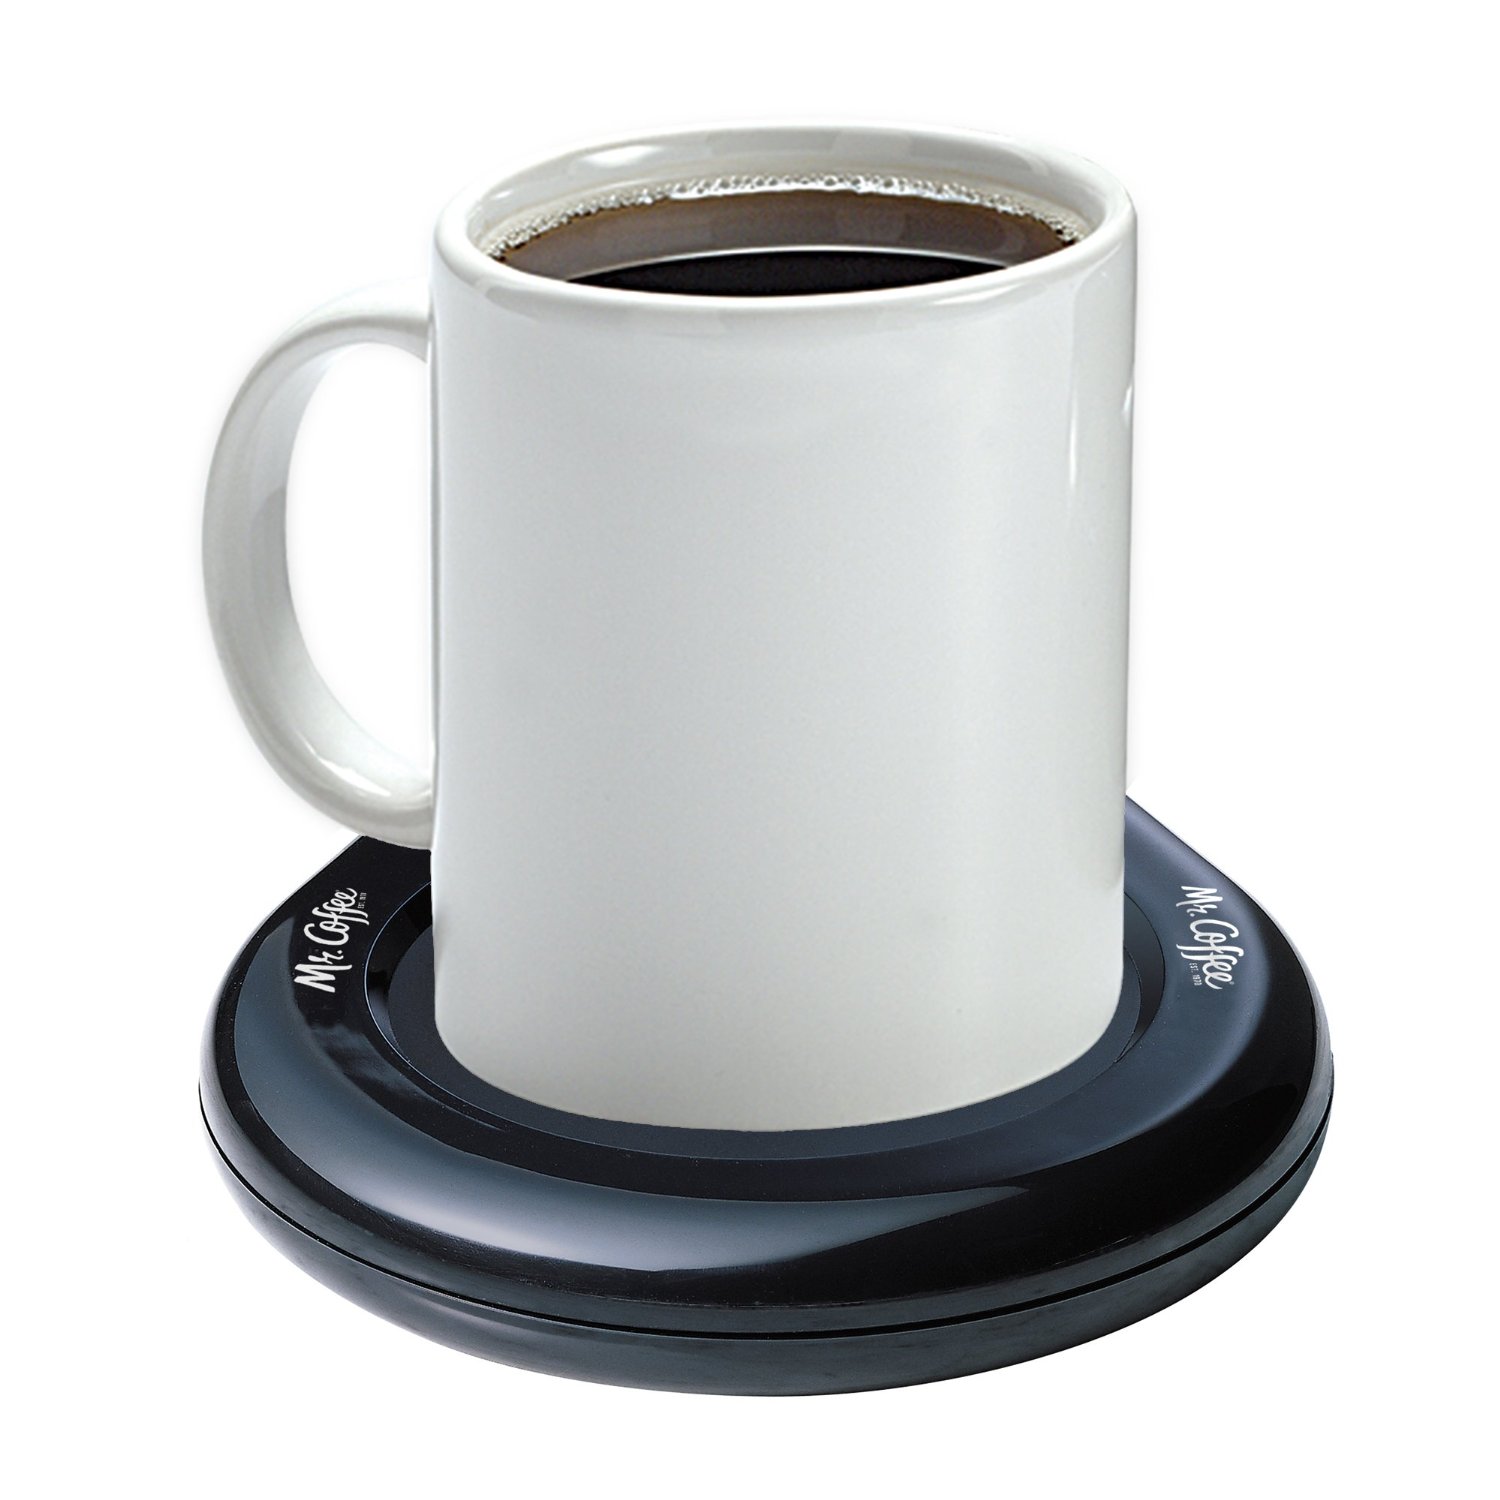 Prevent Cold Coffee with Amazon’s Best Coffee Cup Warmer